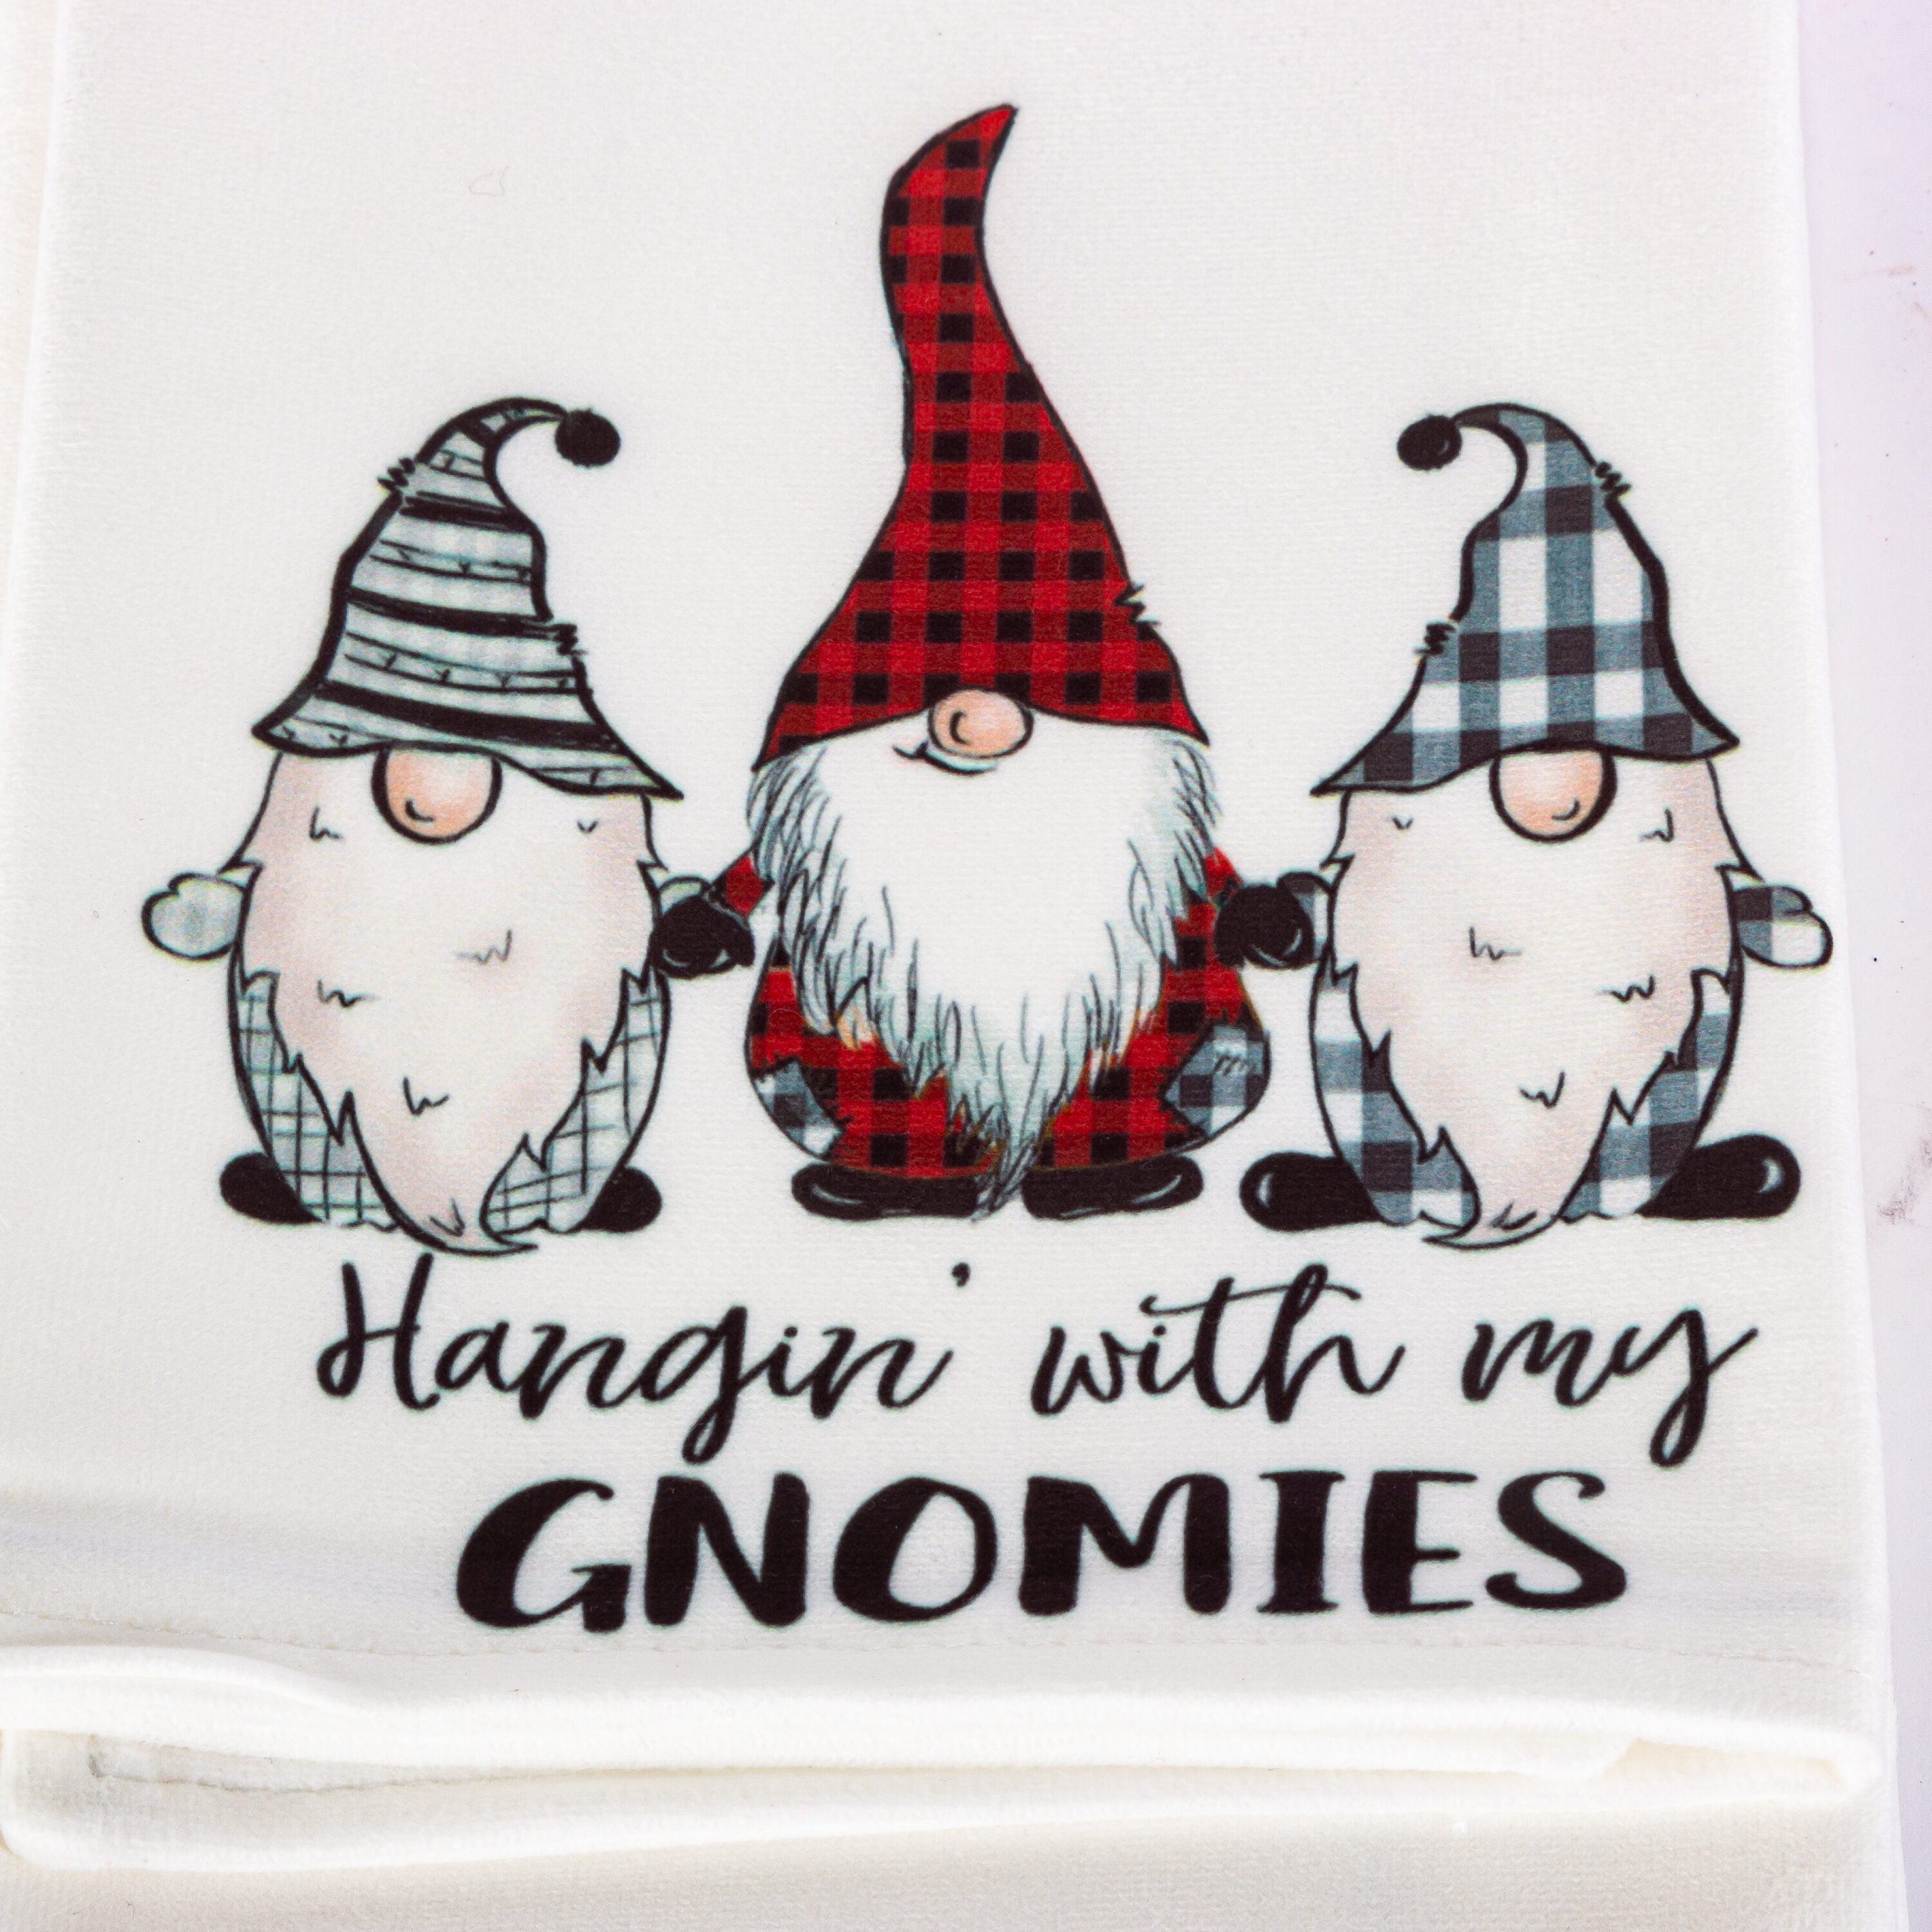 Flour sack tea towel with Santa Gnome in a cup of cocoa | Lee Embroidery LLC